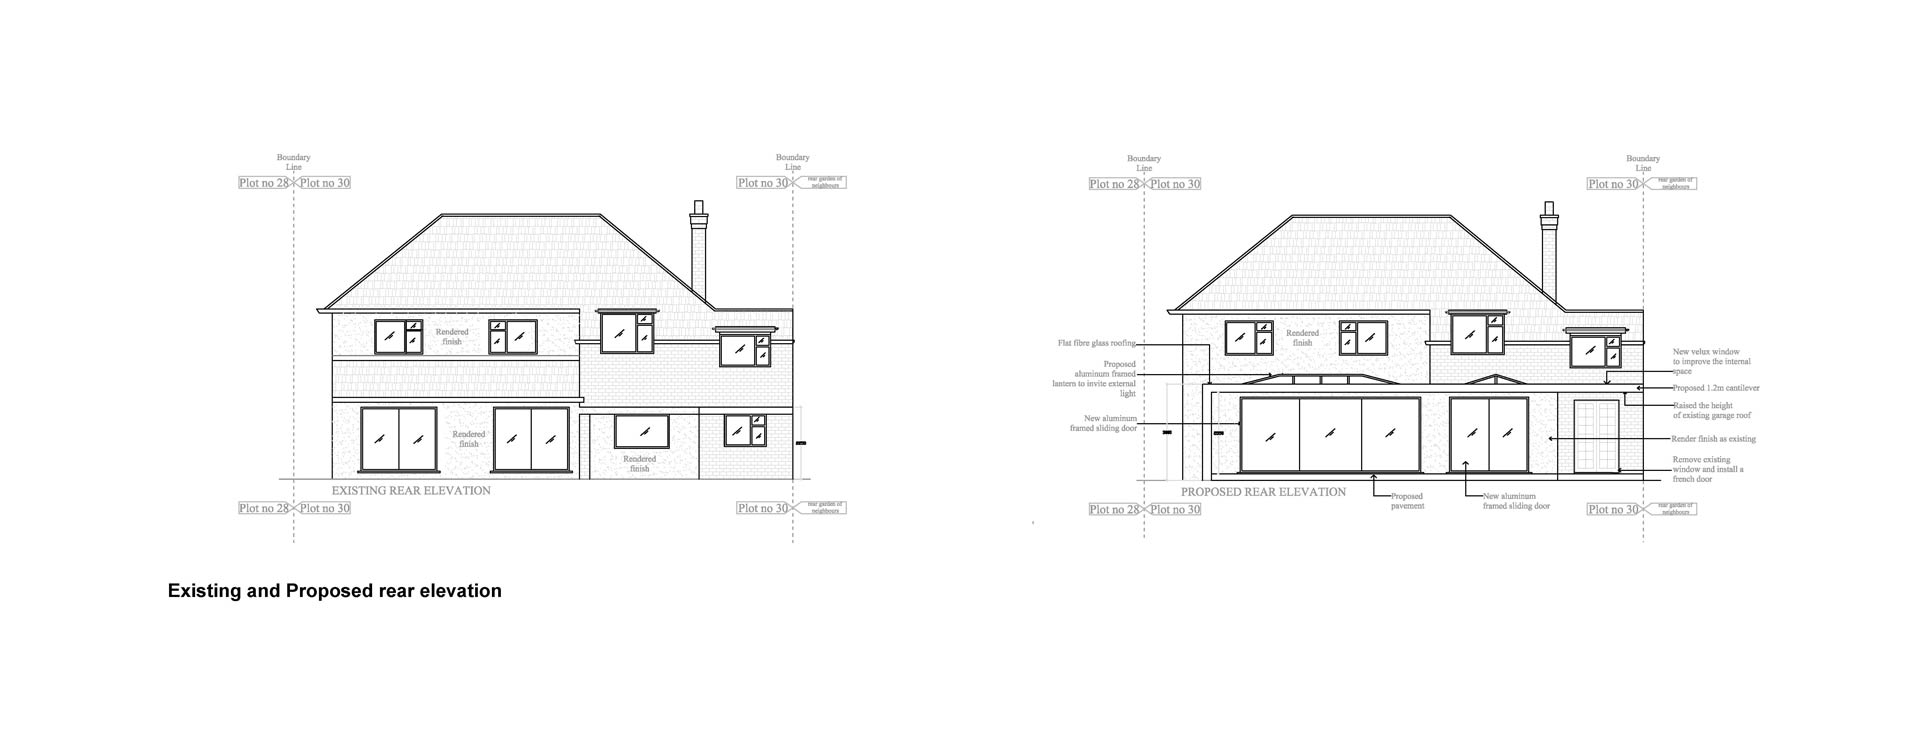 Surrey council Existing and Proposed Rear Elevation